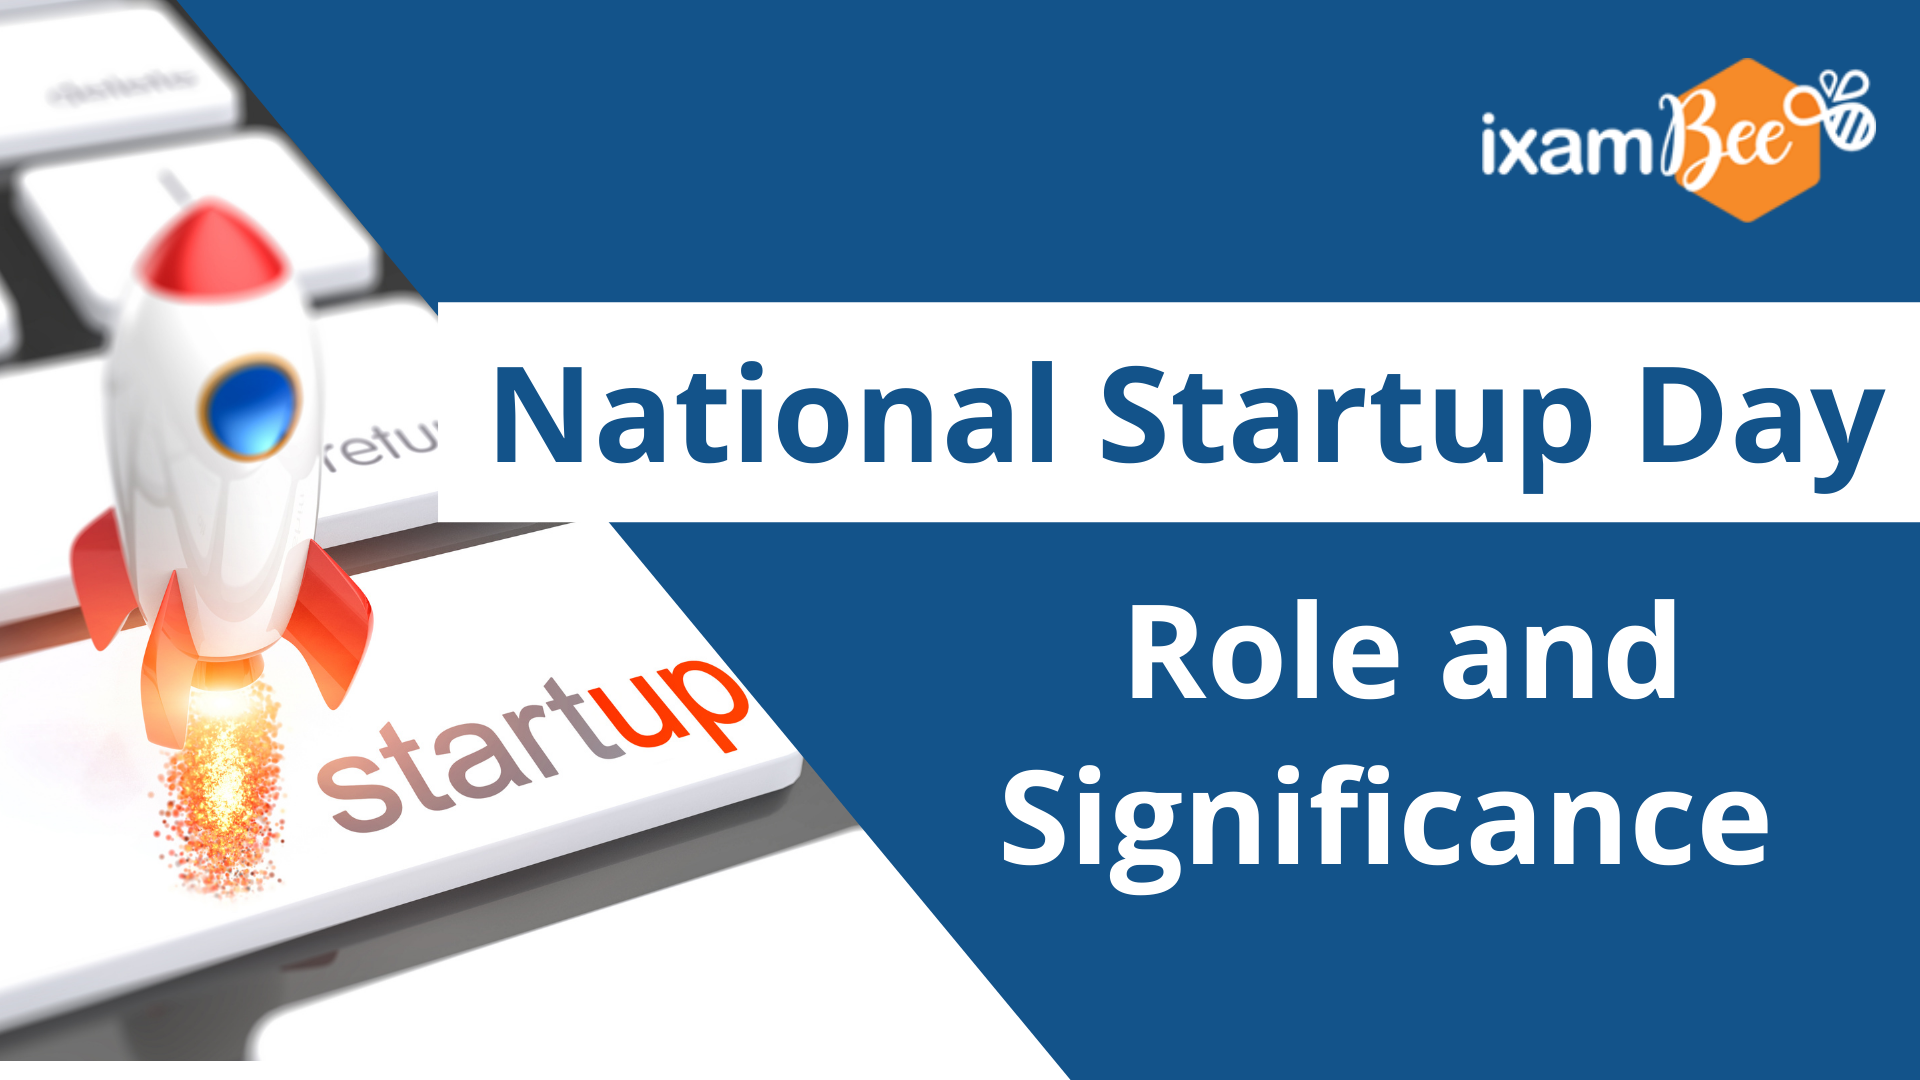 National Startup Day: History, Role and Significance